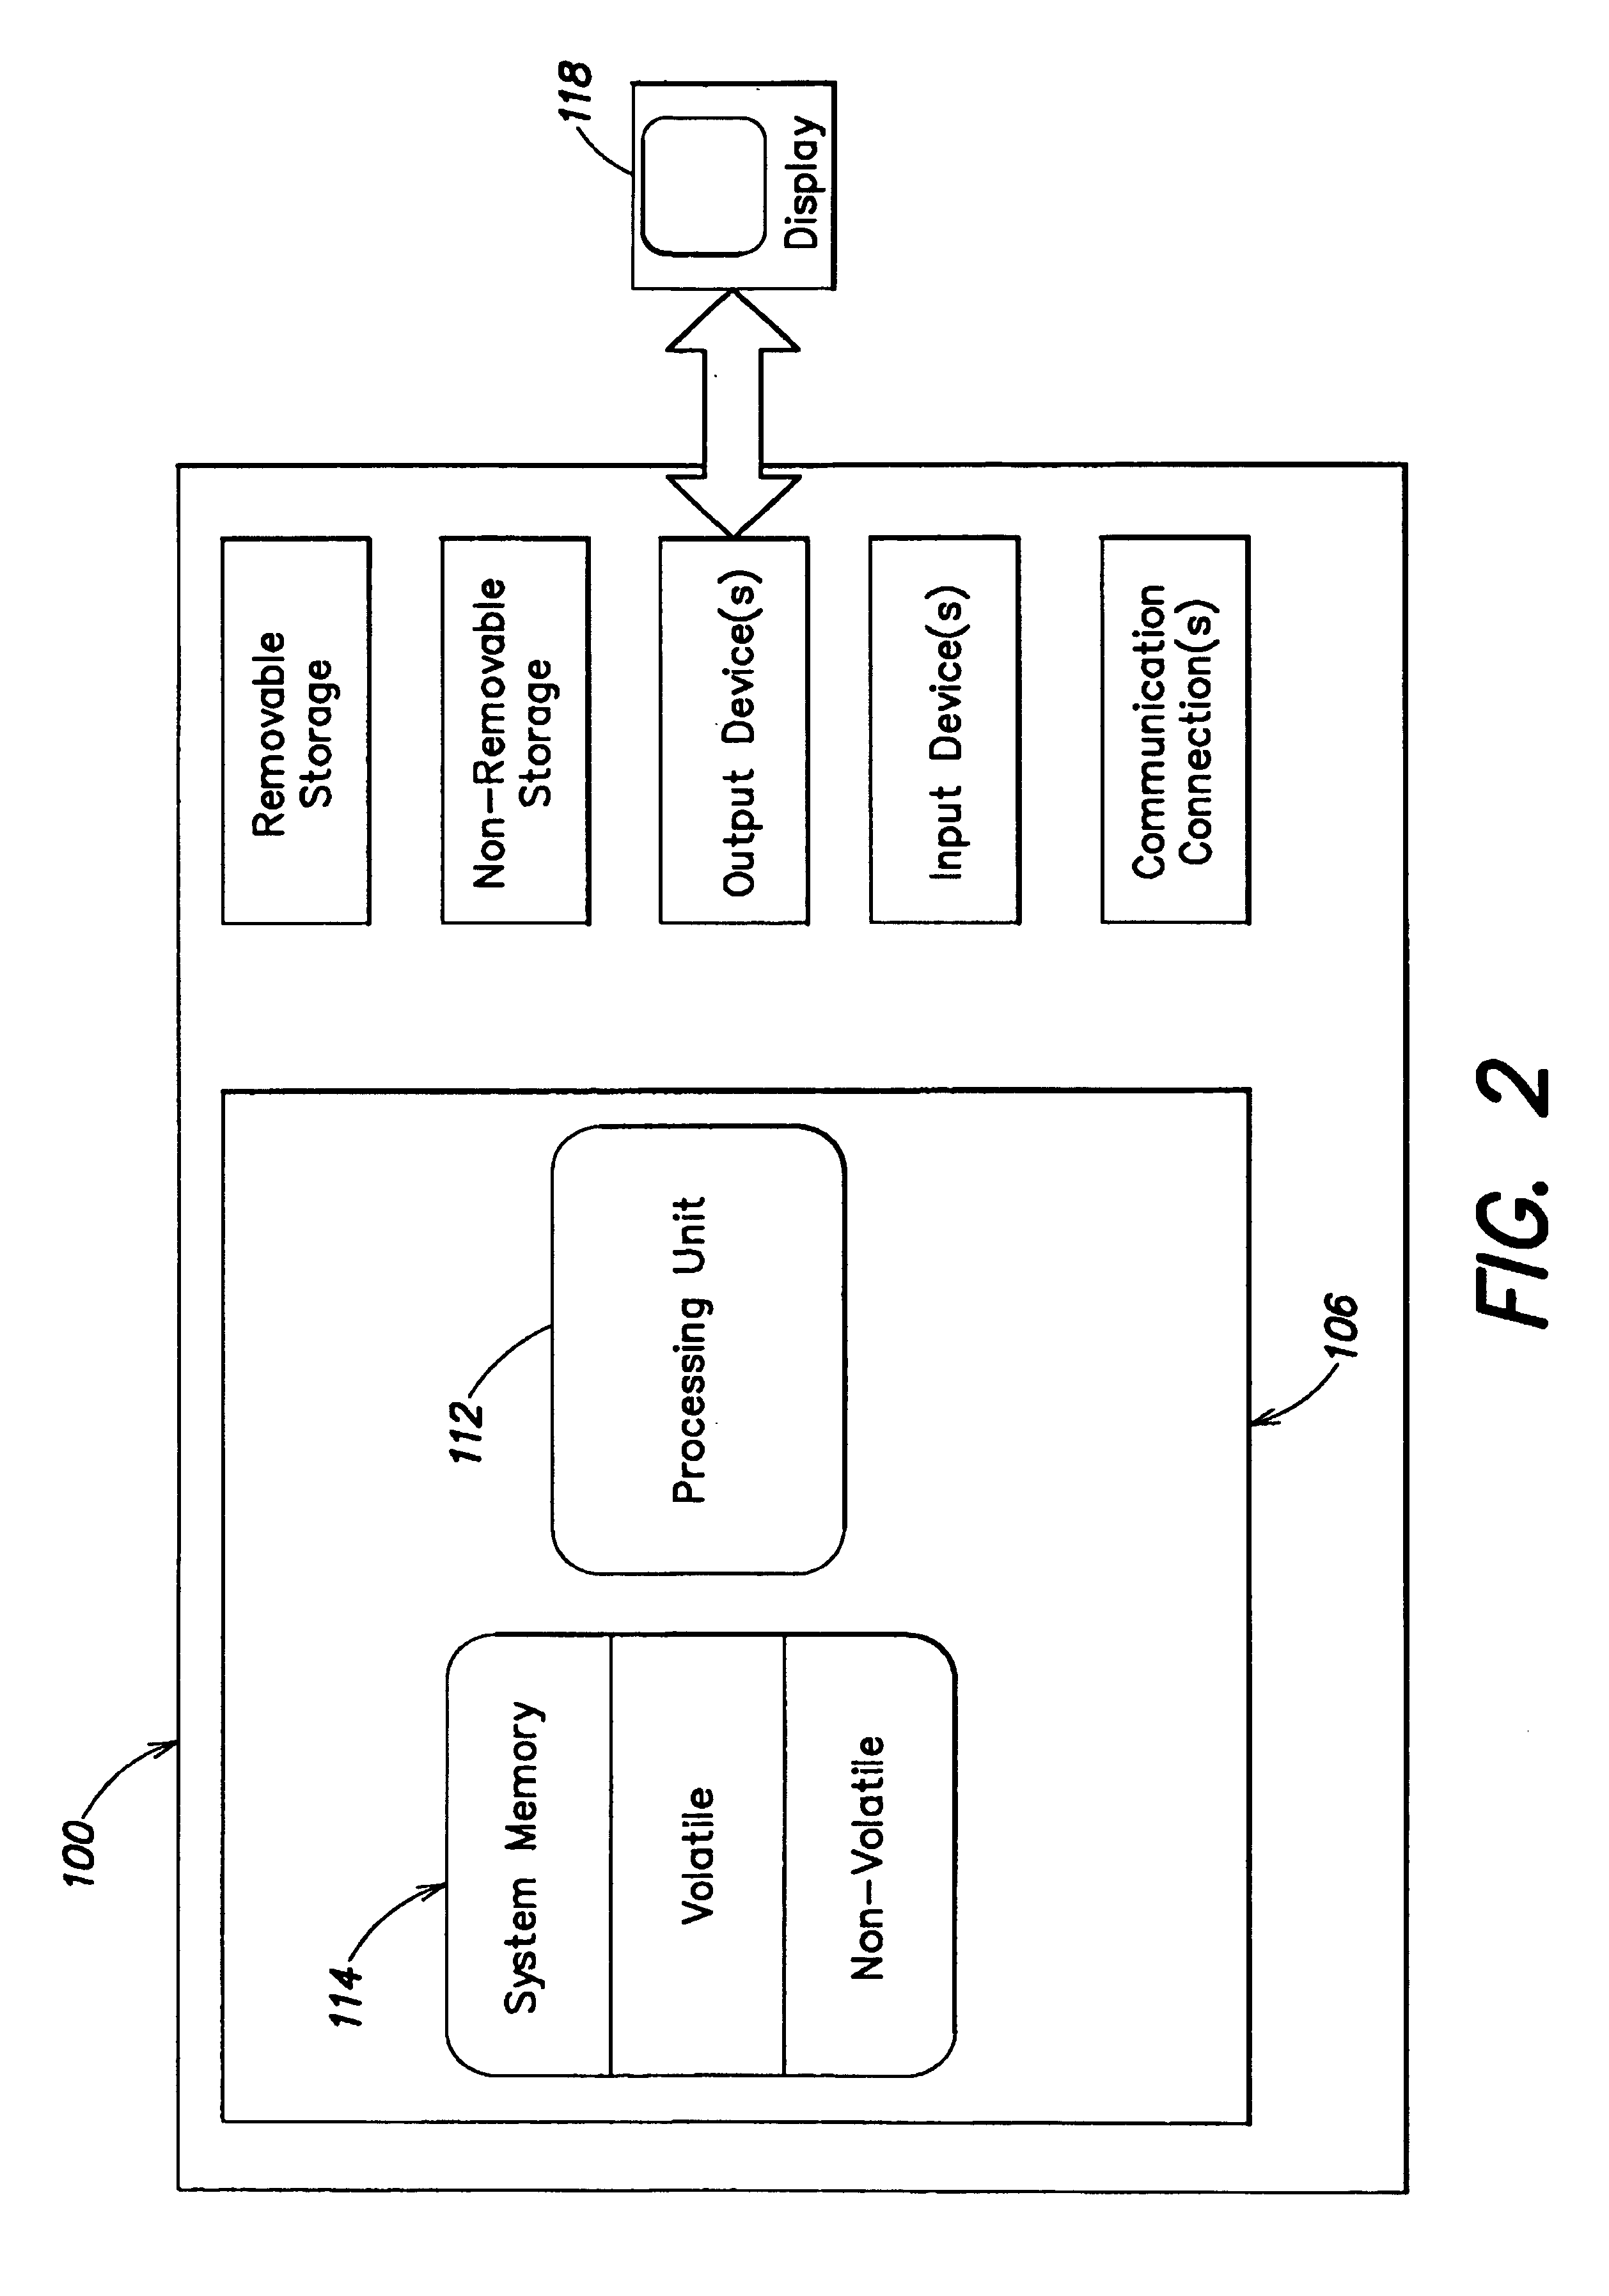 Method and system for managing data records on a computer network